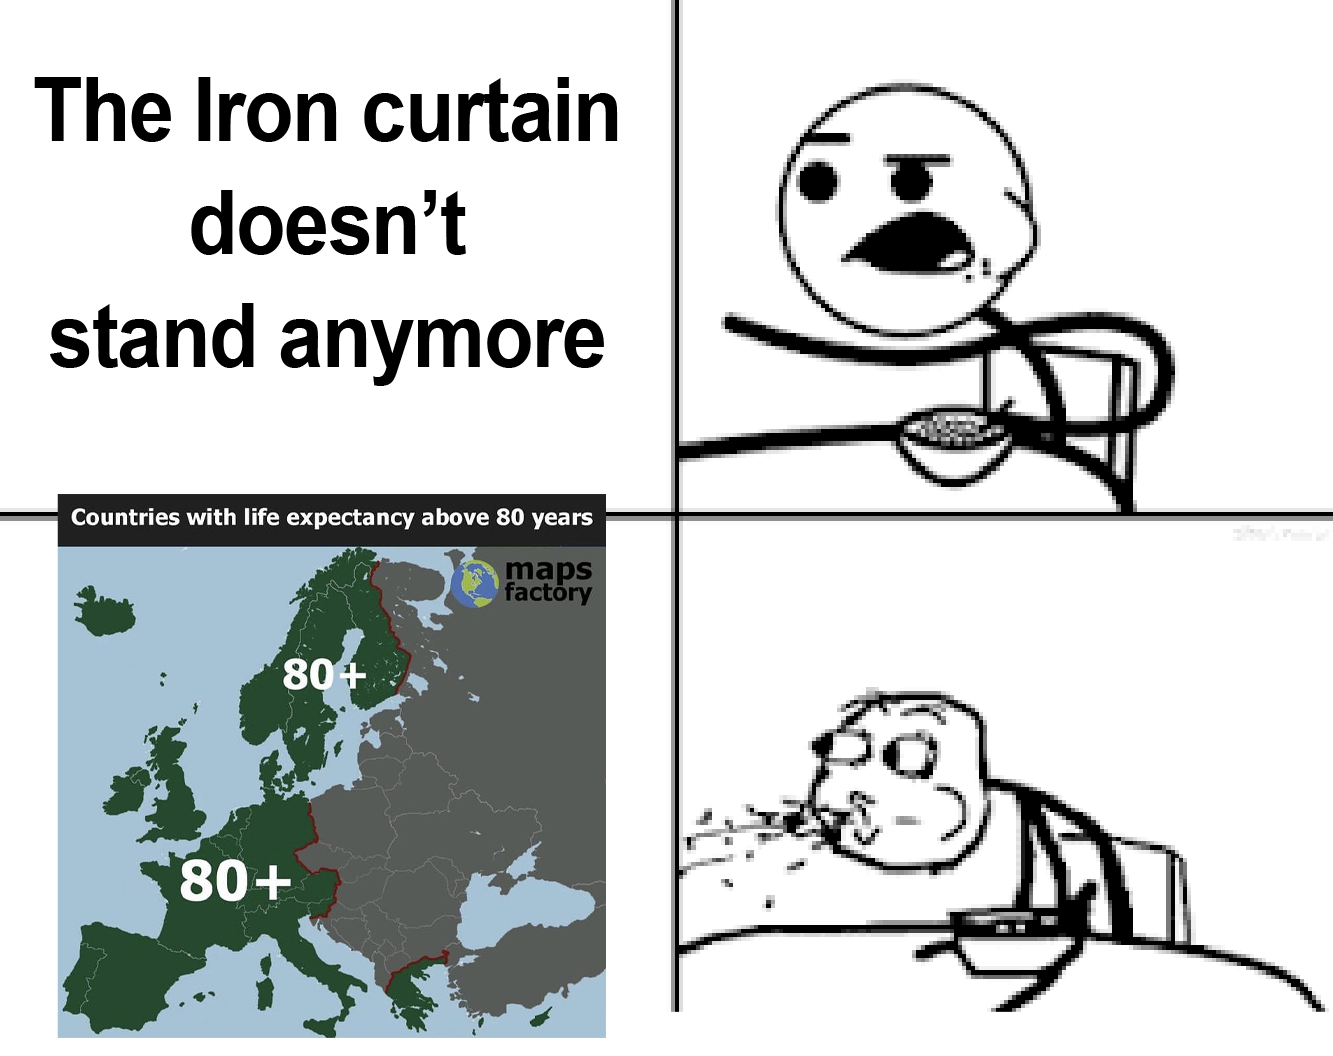 Due to less pollution, the iron curtain is now visible, 30 years later